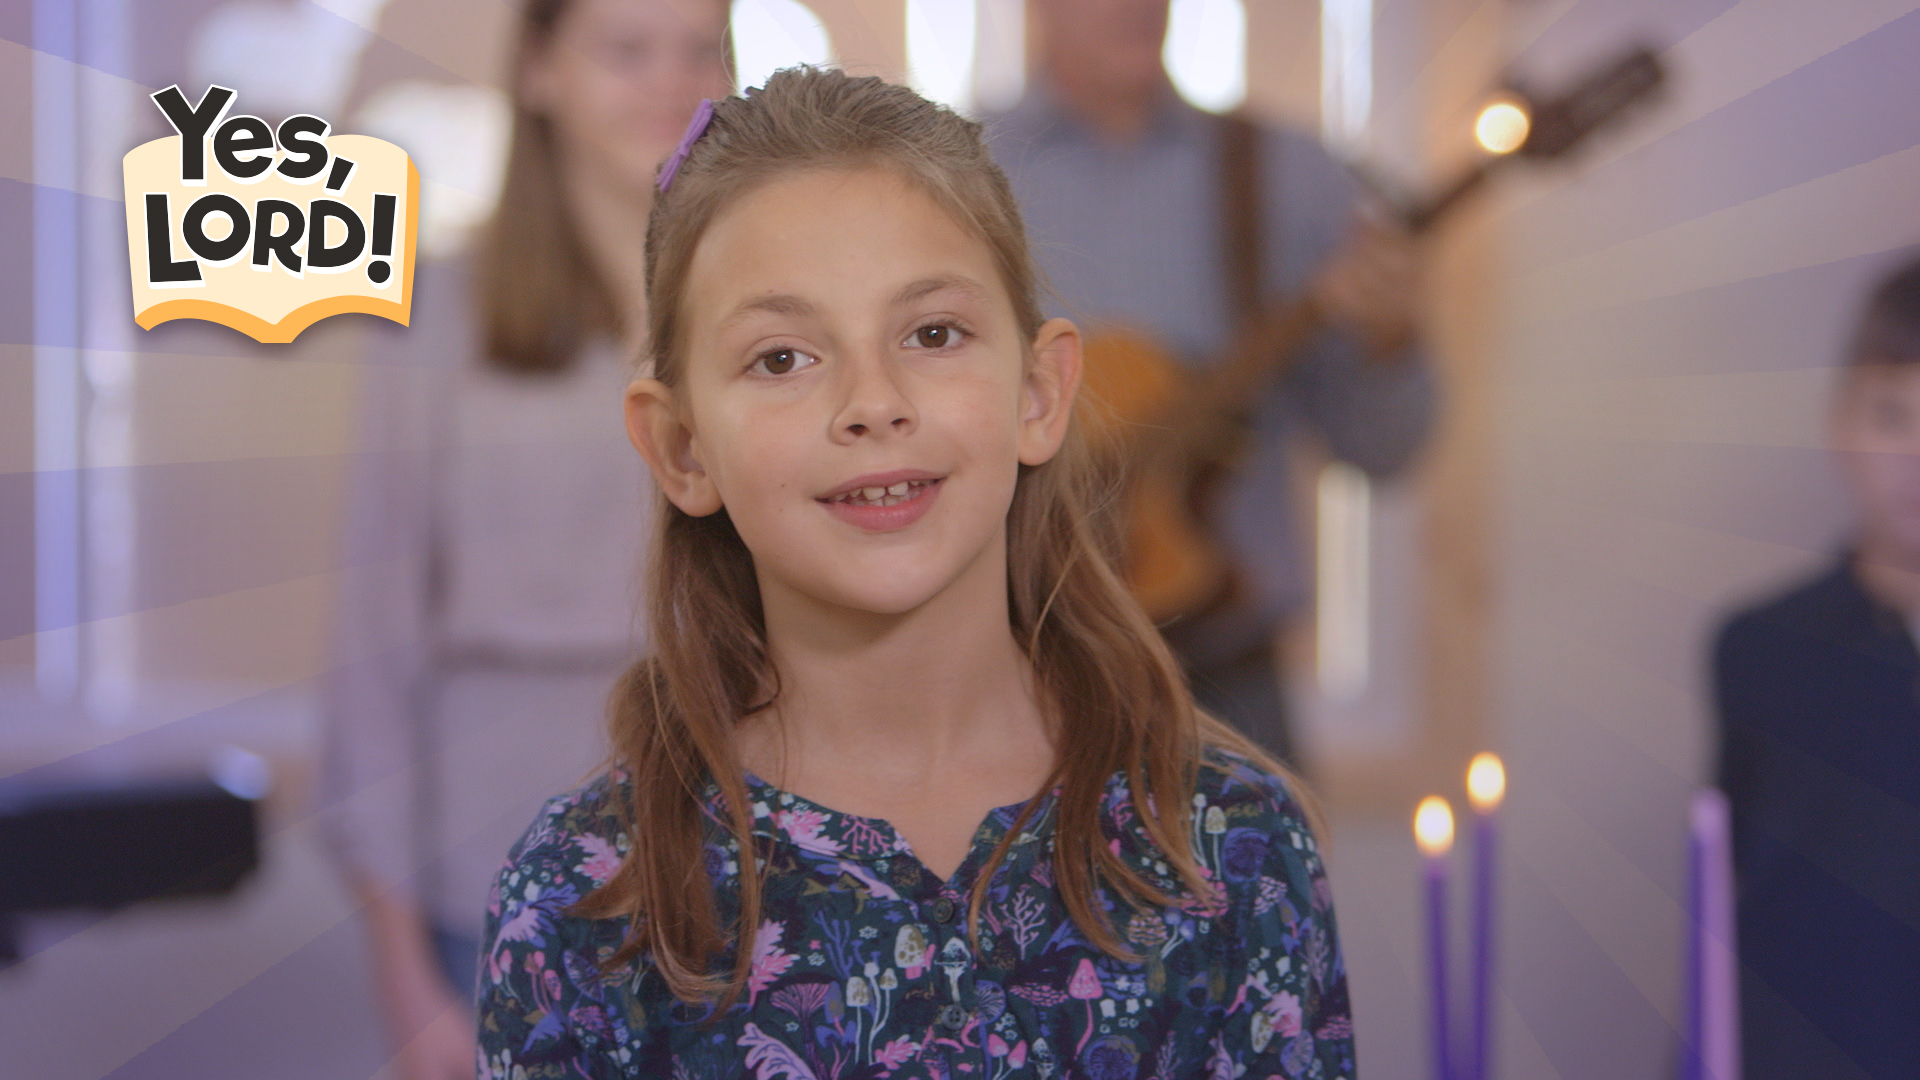 How Christmas began with one girl’s “Yes, Lord!”